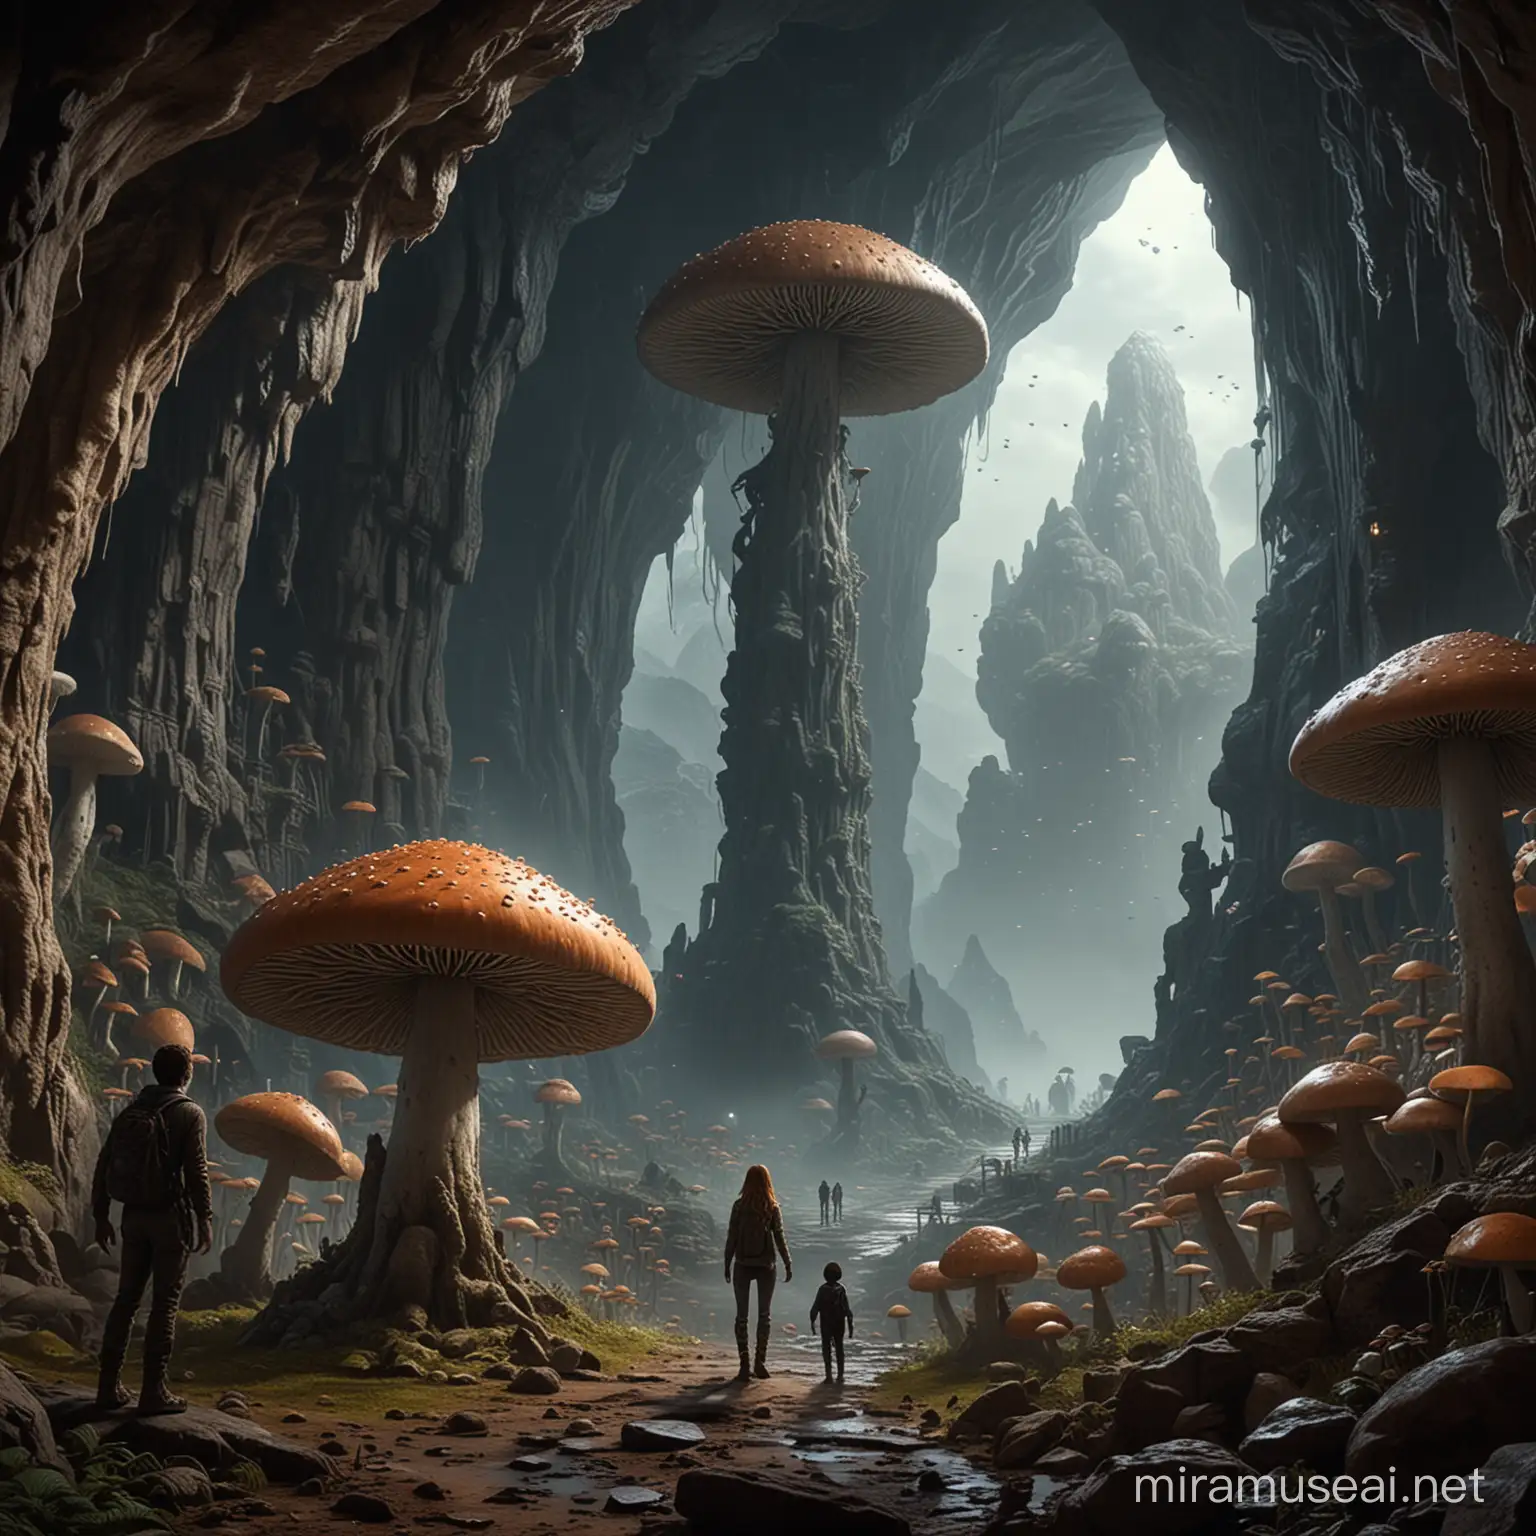 Encounter with Enormous Mushroom Woman in Underground City